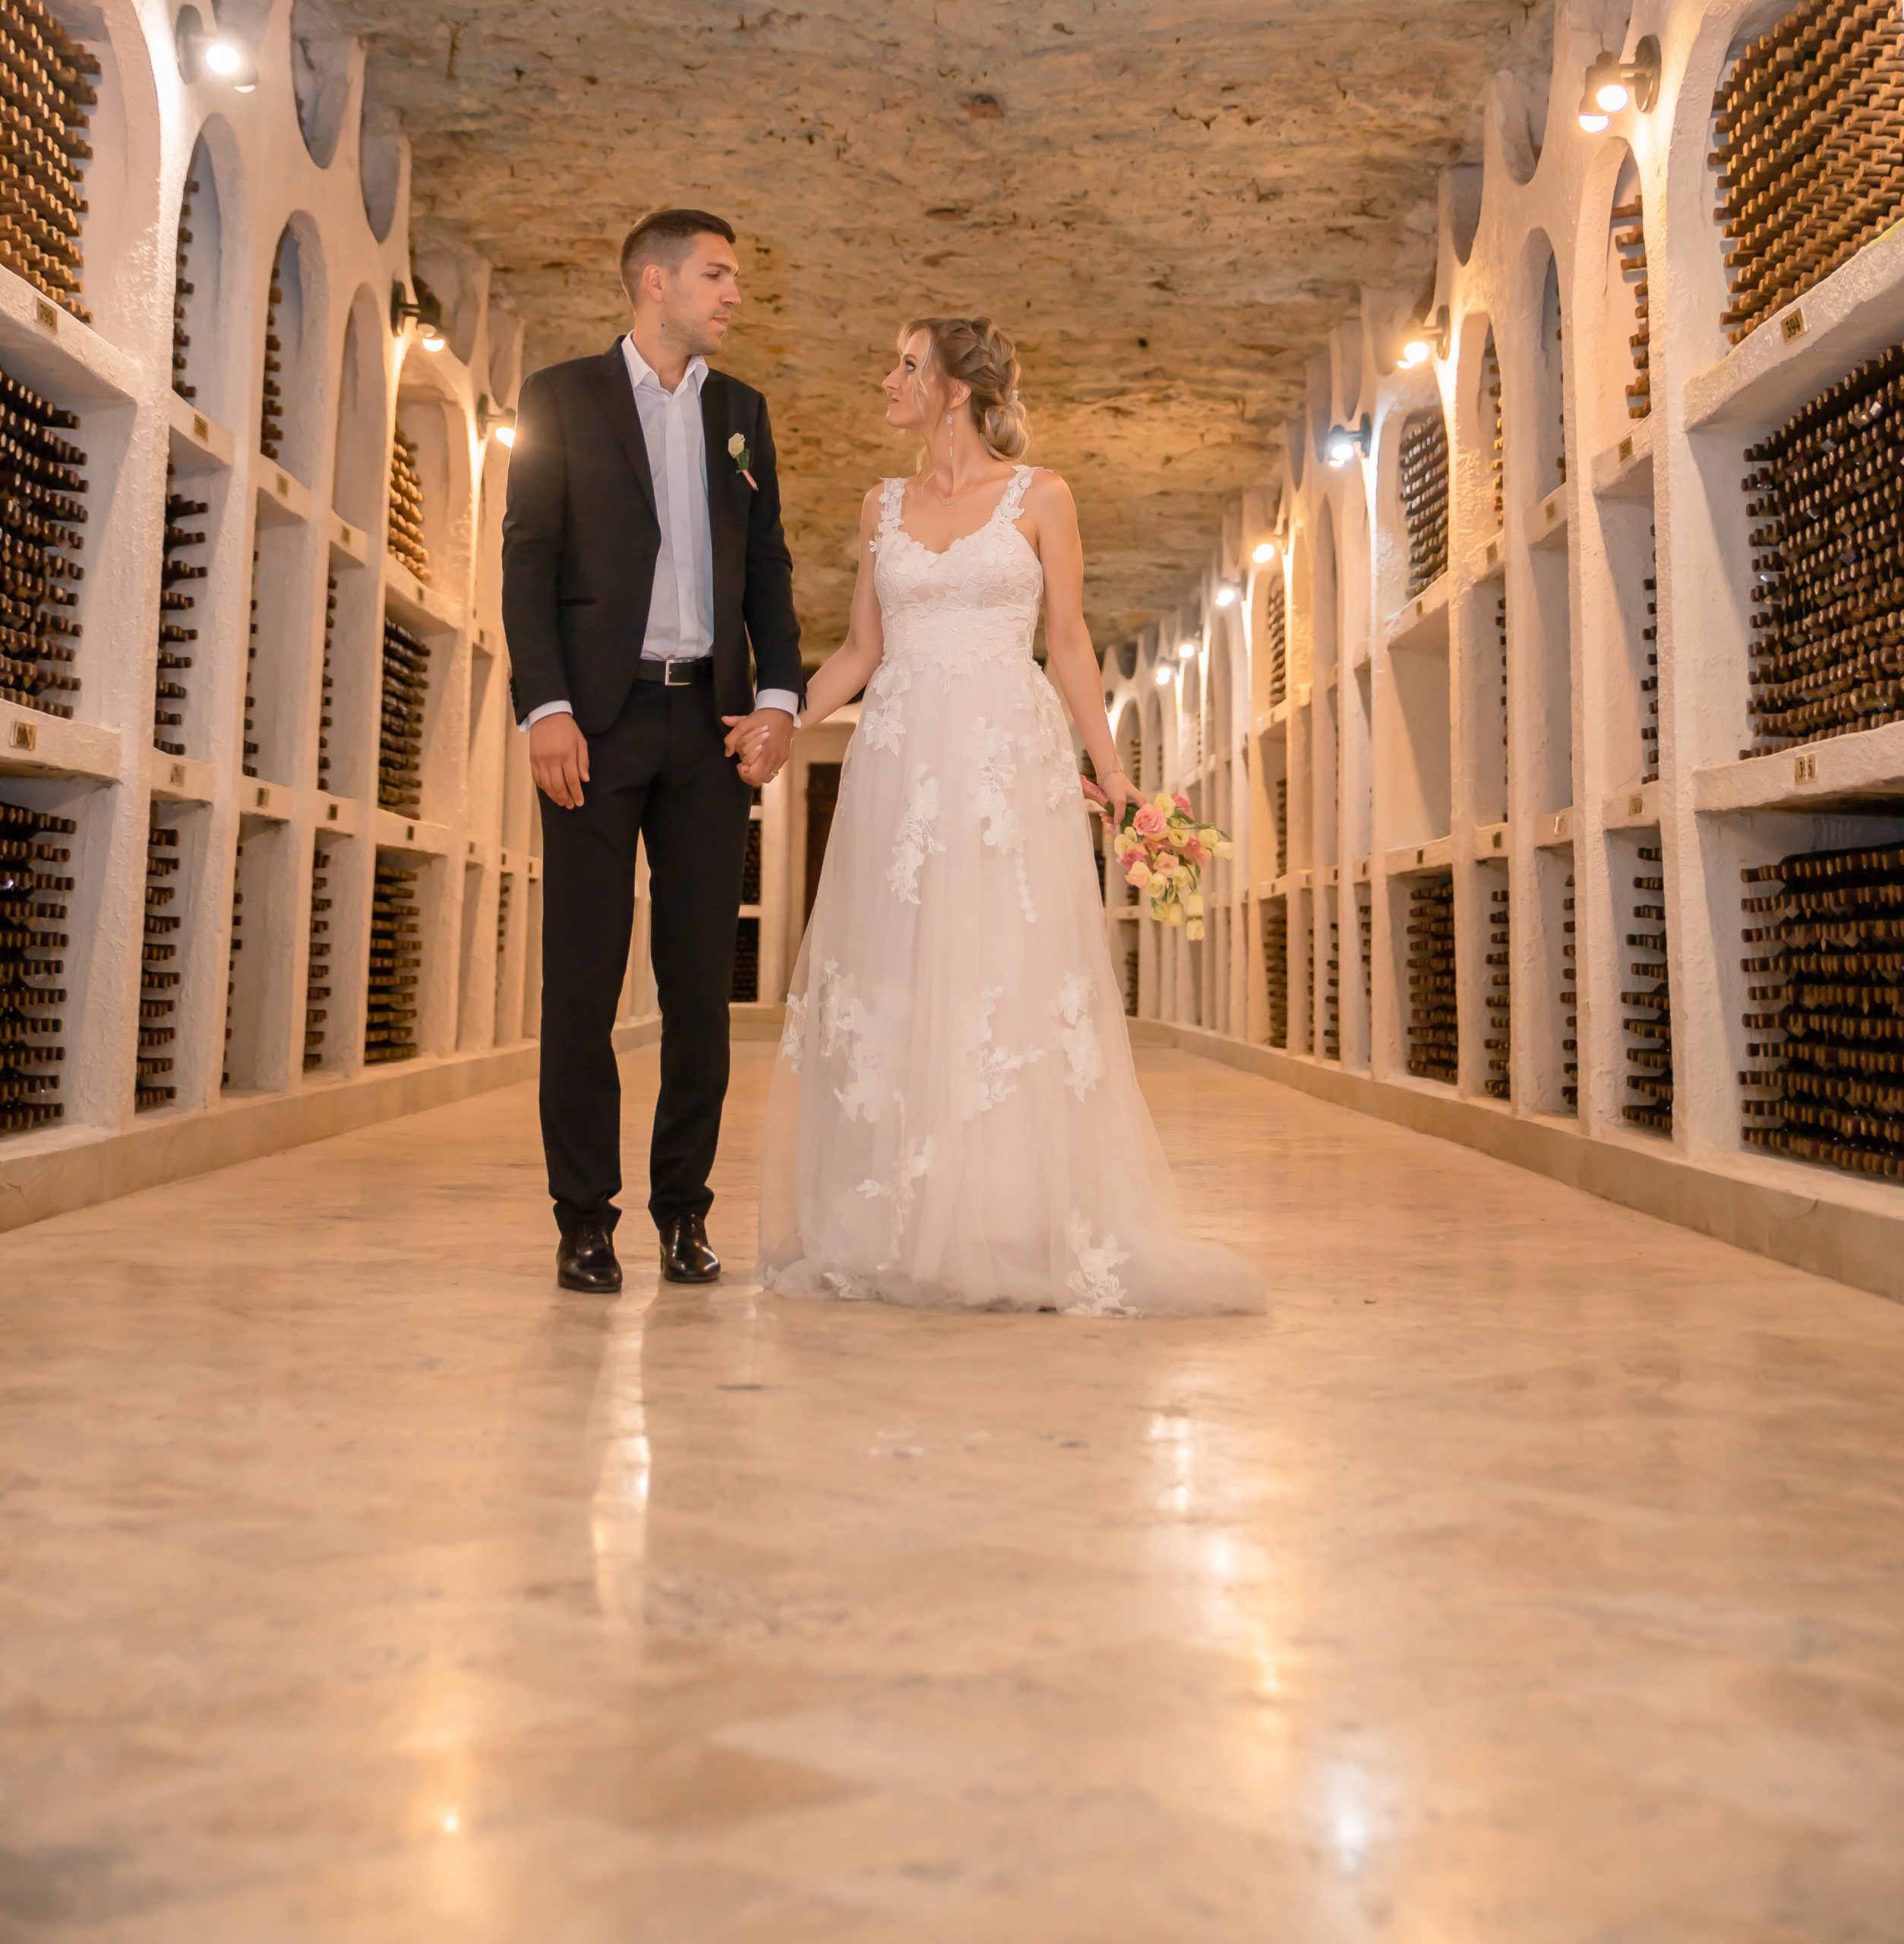 How to Plan a Dream Wedding in Moldova